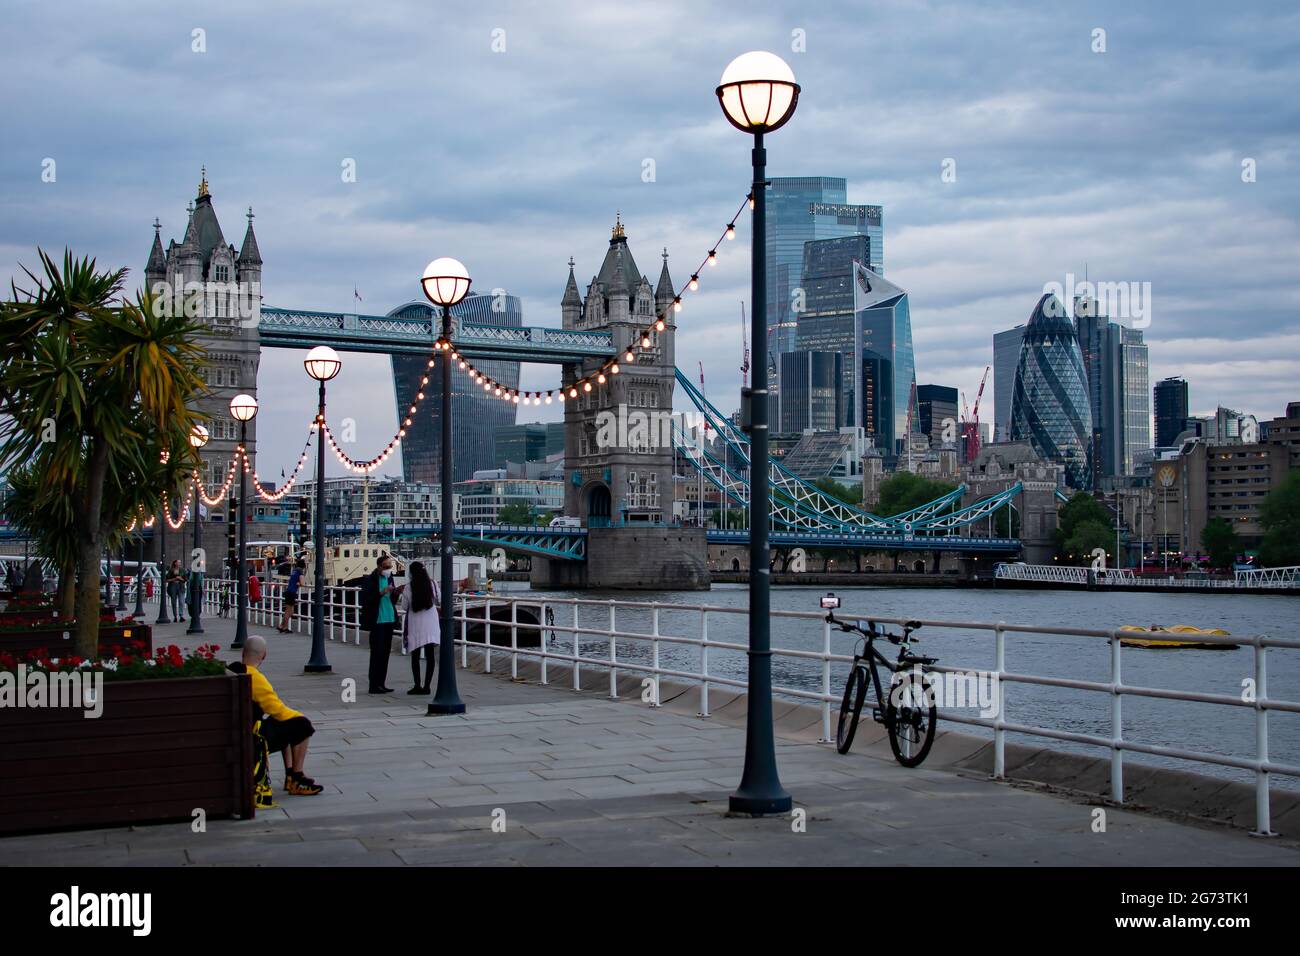 People stand along Butler's Wharf admiring the views across the City of London and Tower Bridge just before sunset as the street lamps illuminate. Stock Photo